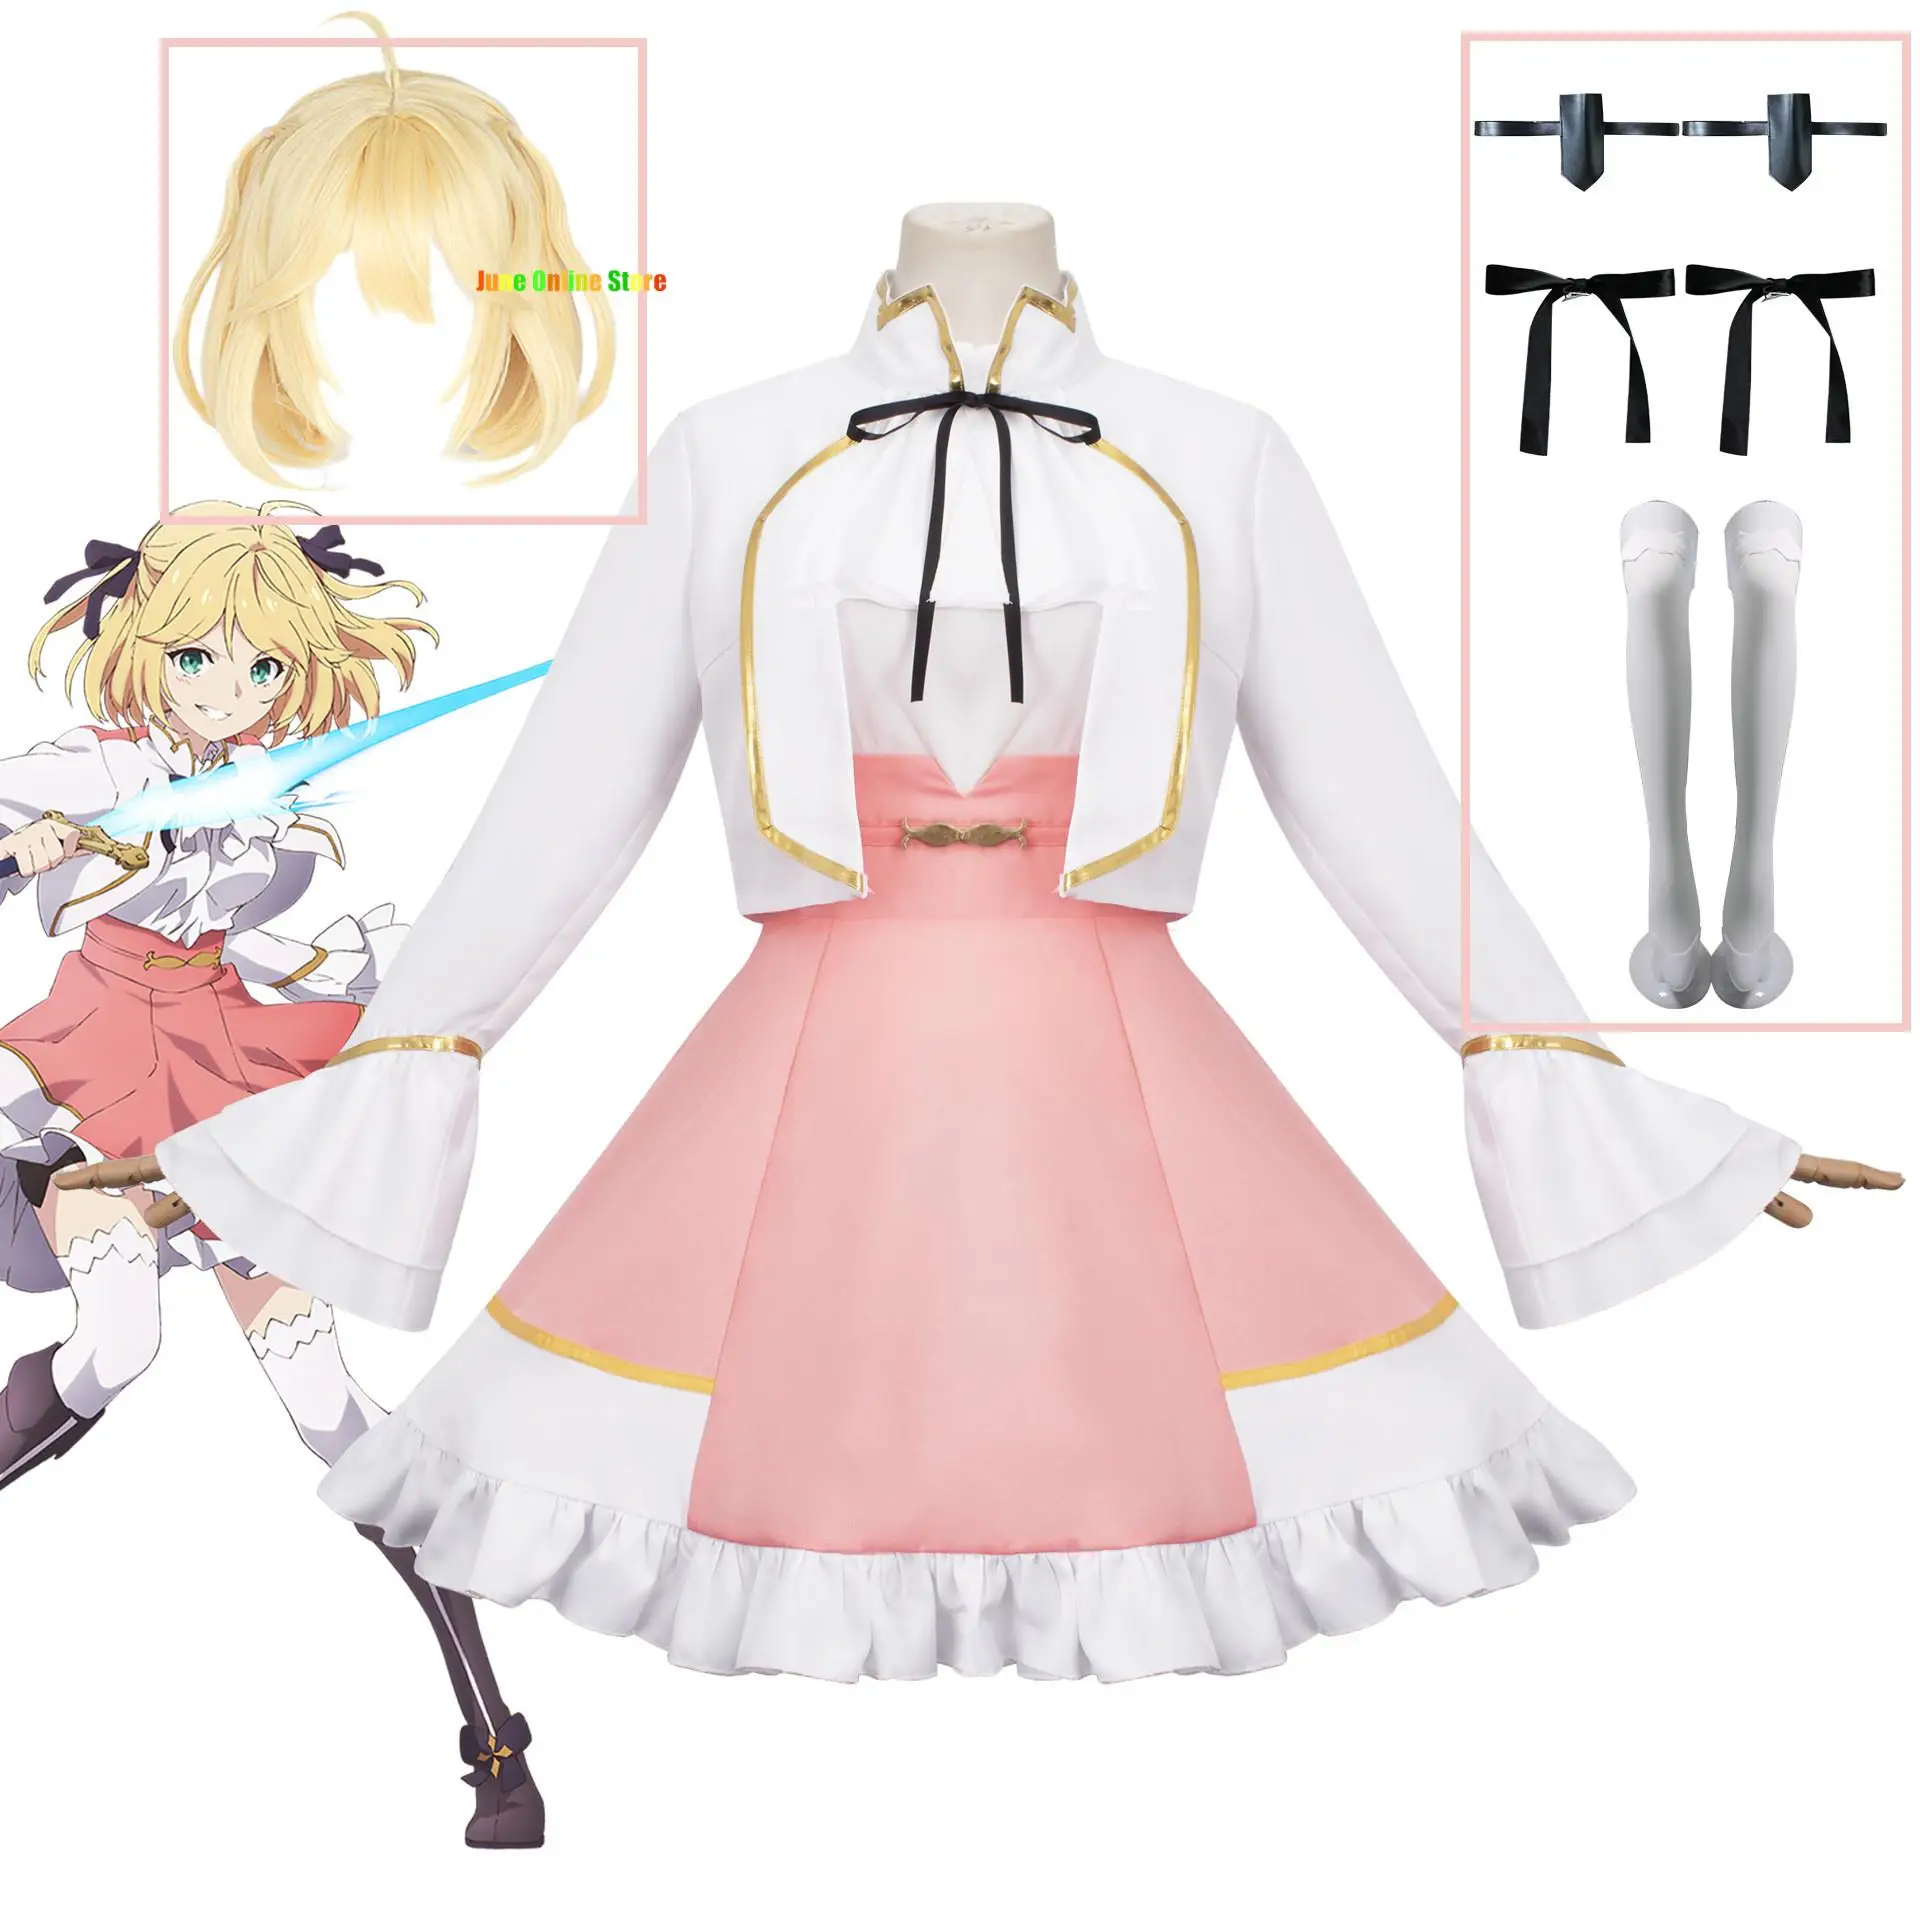 

Reincarnated Princess and the Genius Cosplay Anime Anisphia Wynn Palettia Cospaly Dress Costume Outfits Halloween Party Suit